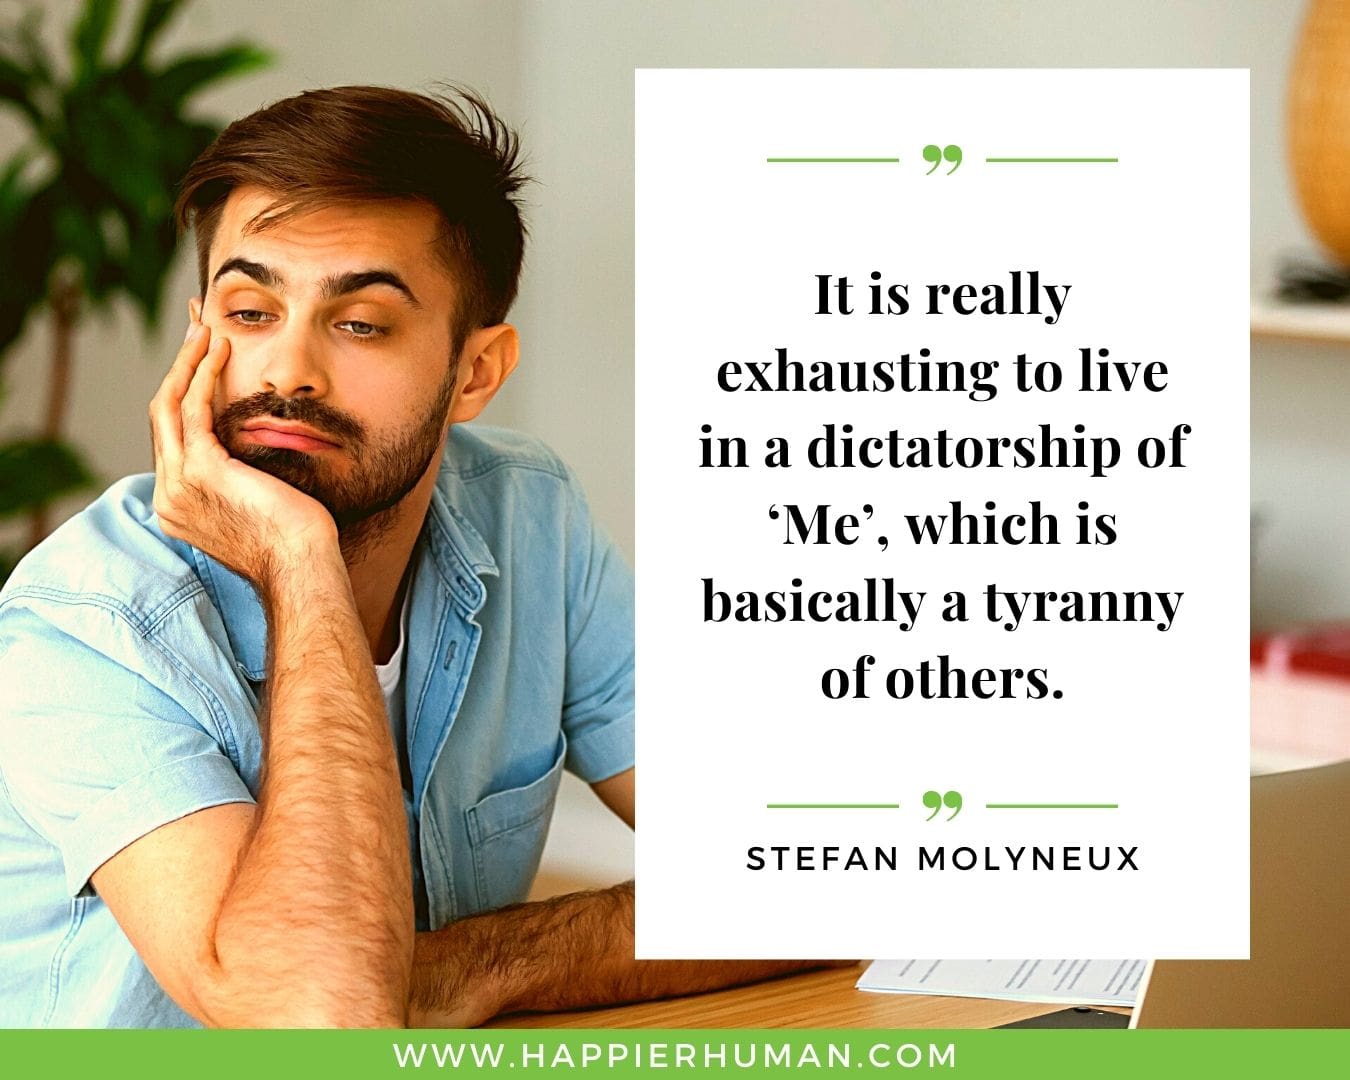 Toxic People Quotes - “It is really exhausting to live in a dictatorship of ‘Me’, which is basically a tyranny of others.” – Stefan Molyneux